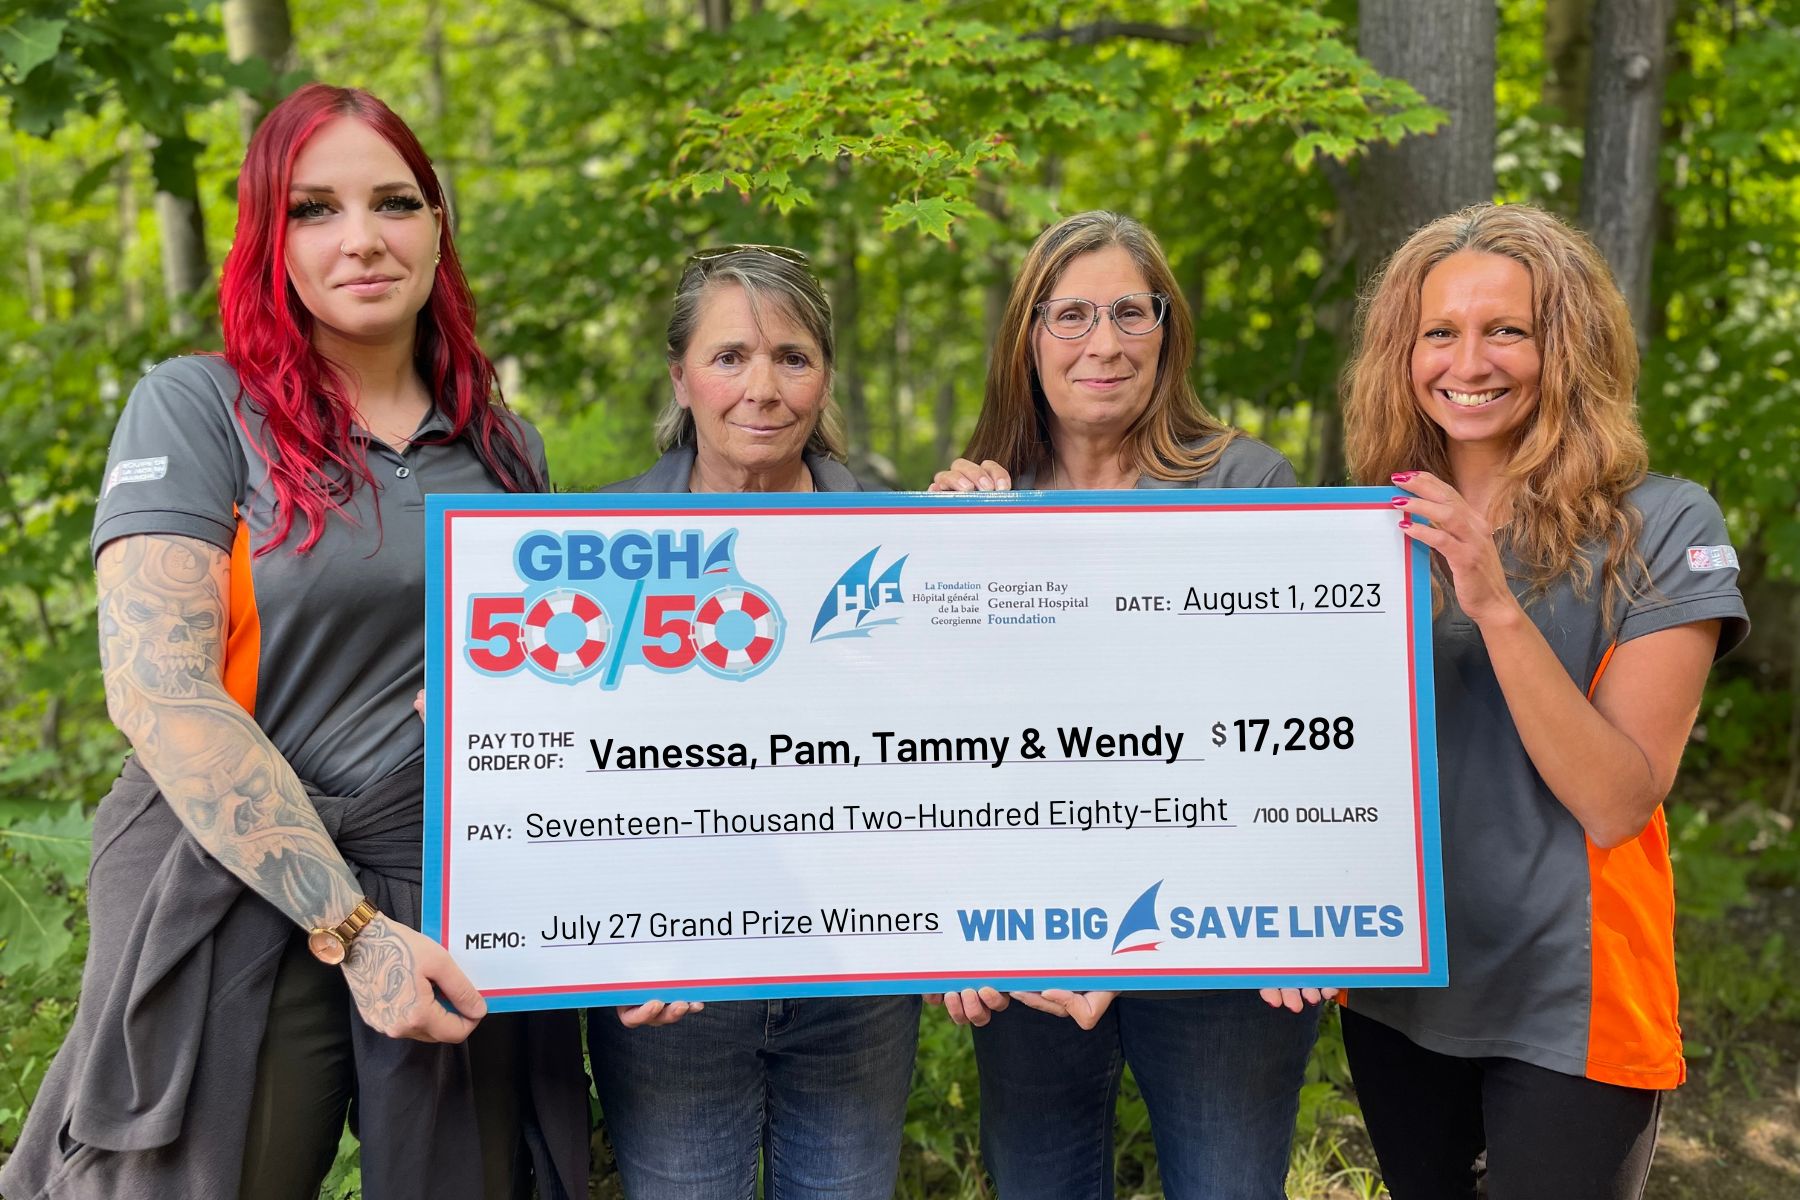 Vanessa, Pam, Tammy and Wendy pose with a cheque for $17,288 for winning the July 2023 50/50 Draw